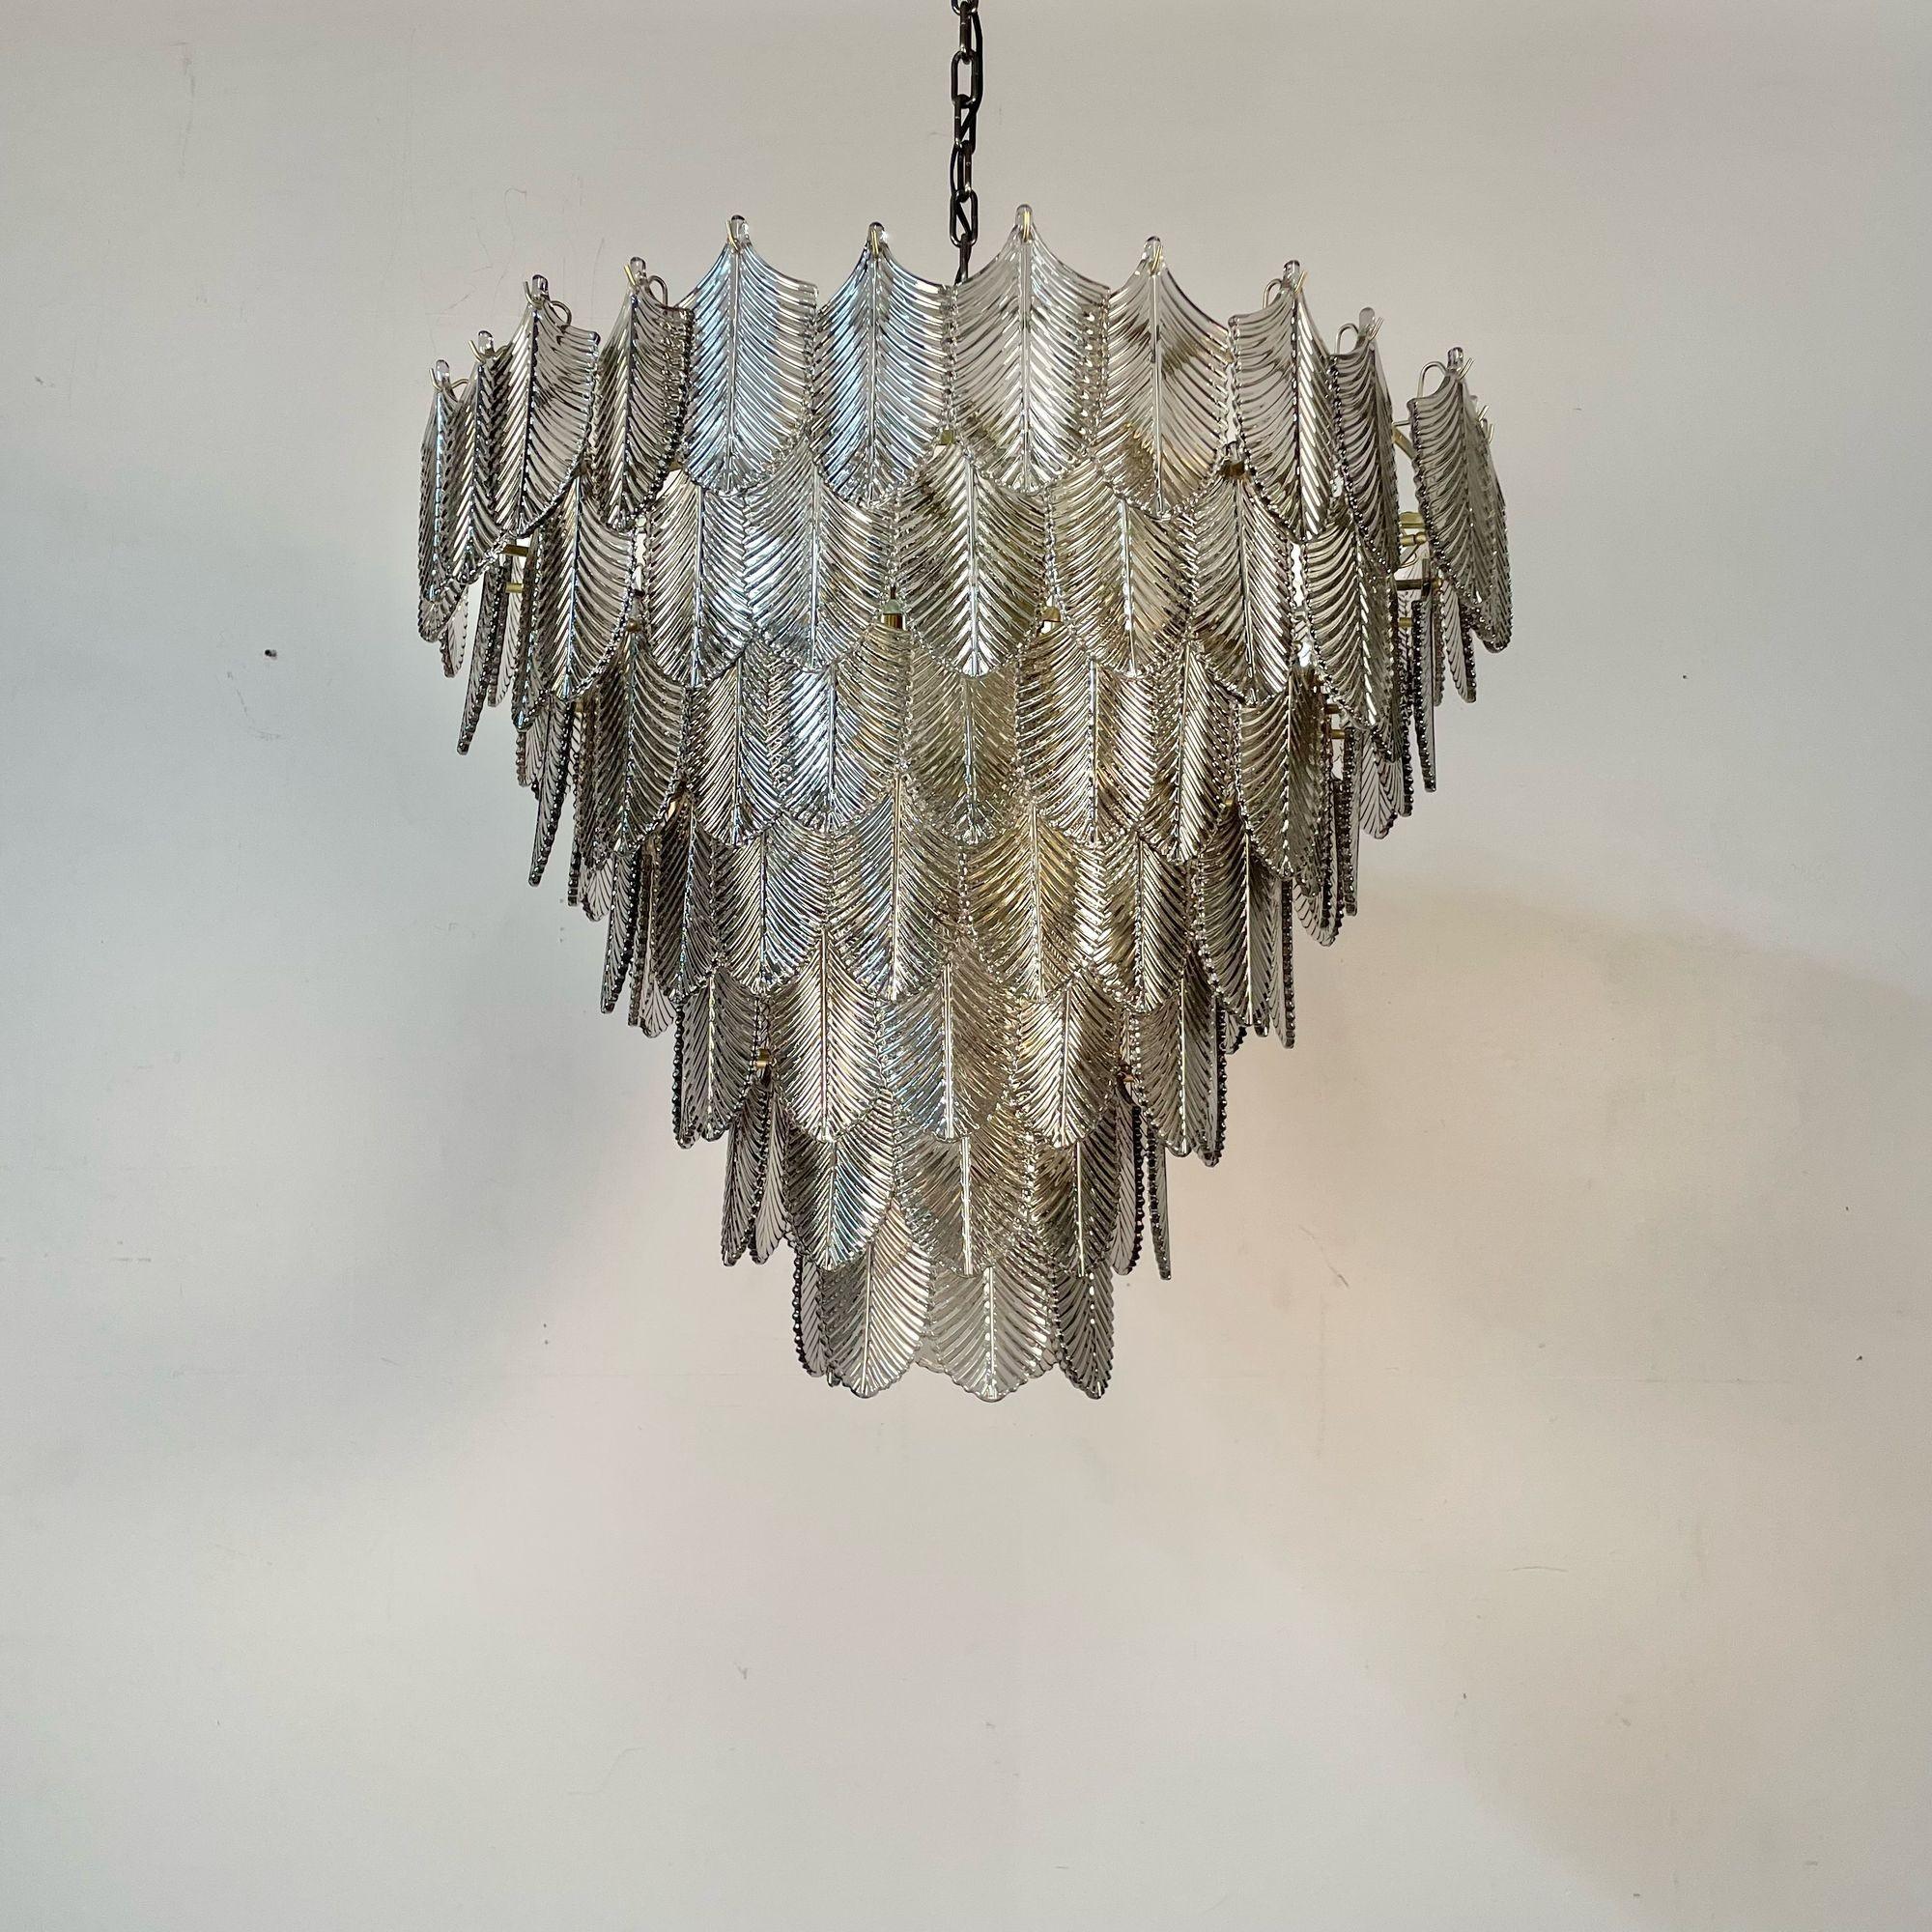 Modern Art Deco Style Chandelier / Pendant, Brass and Smoked Glass by Eicholtz For Sale 3